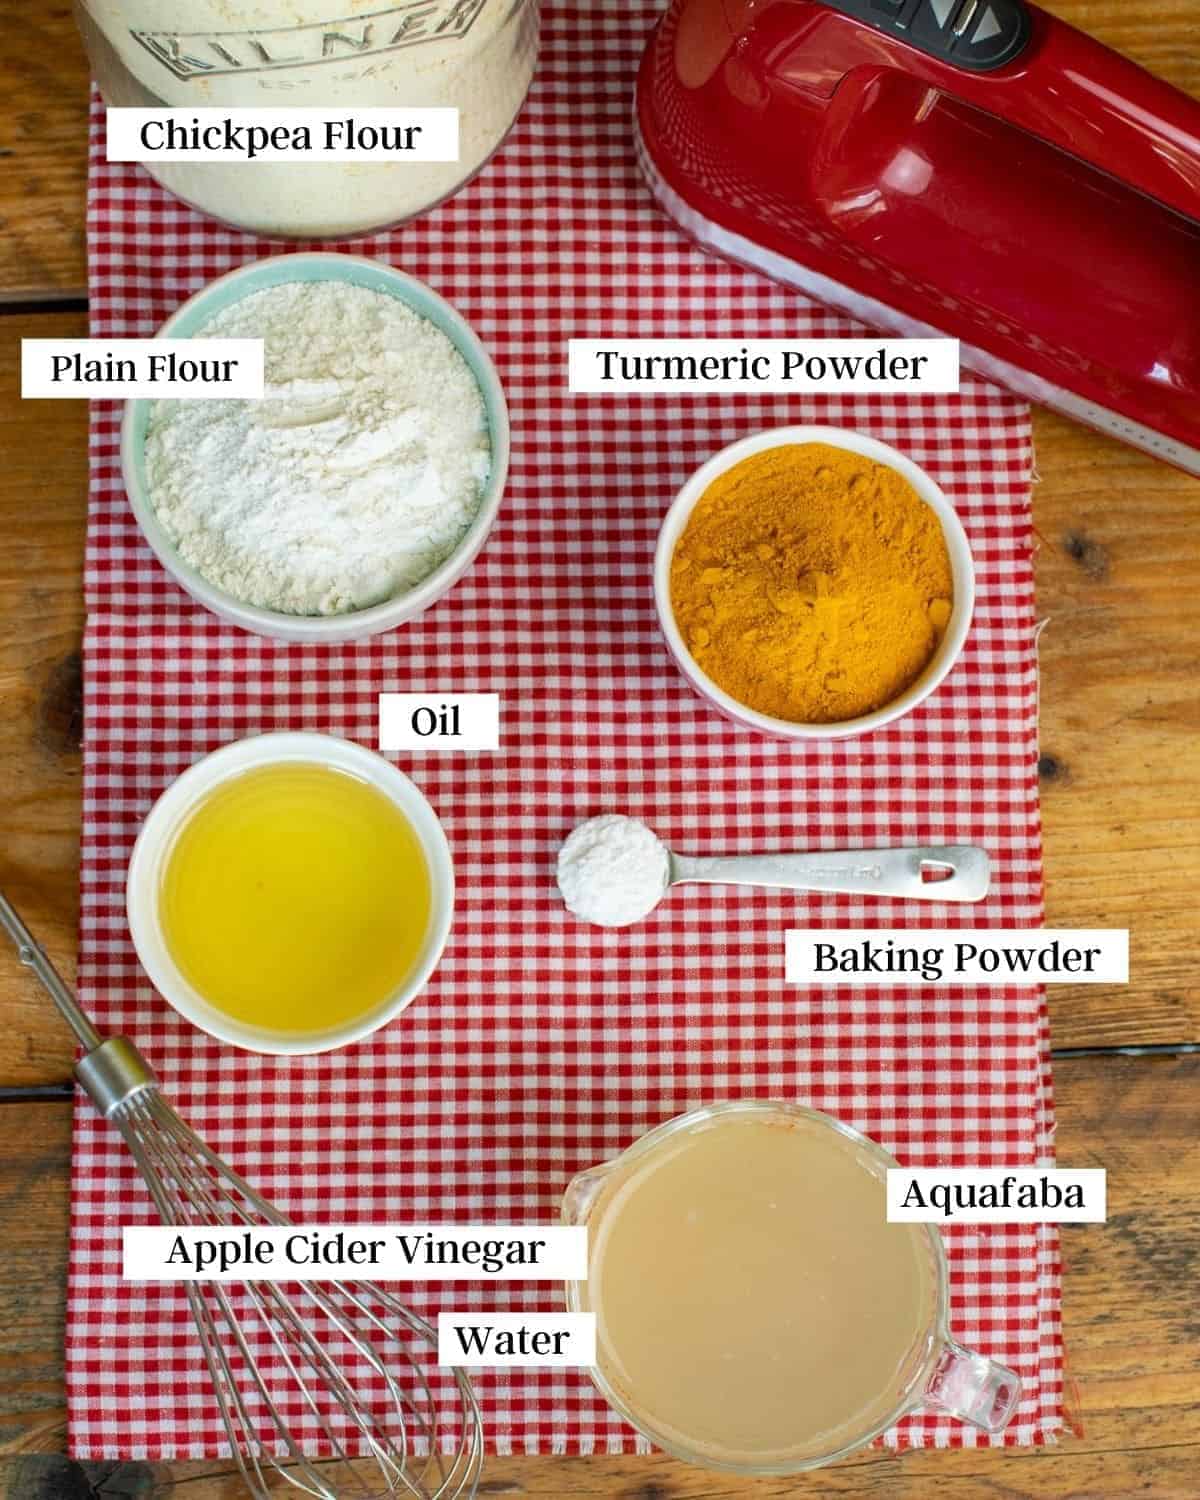 All of the ingredients for this recipe laid out on a red and white cloth